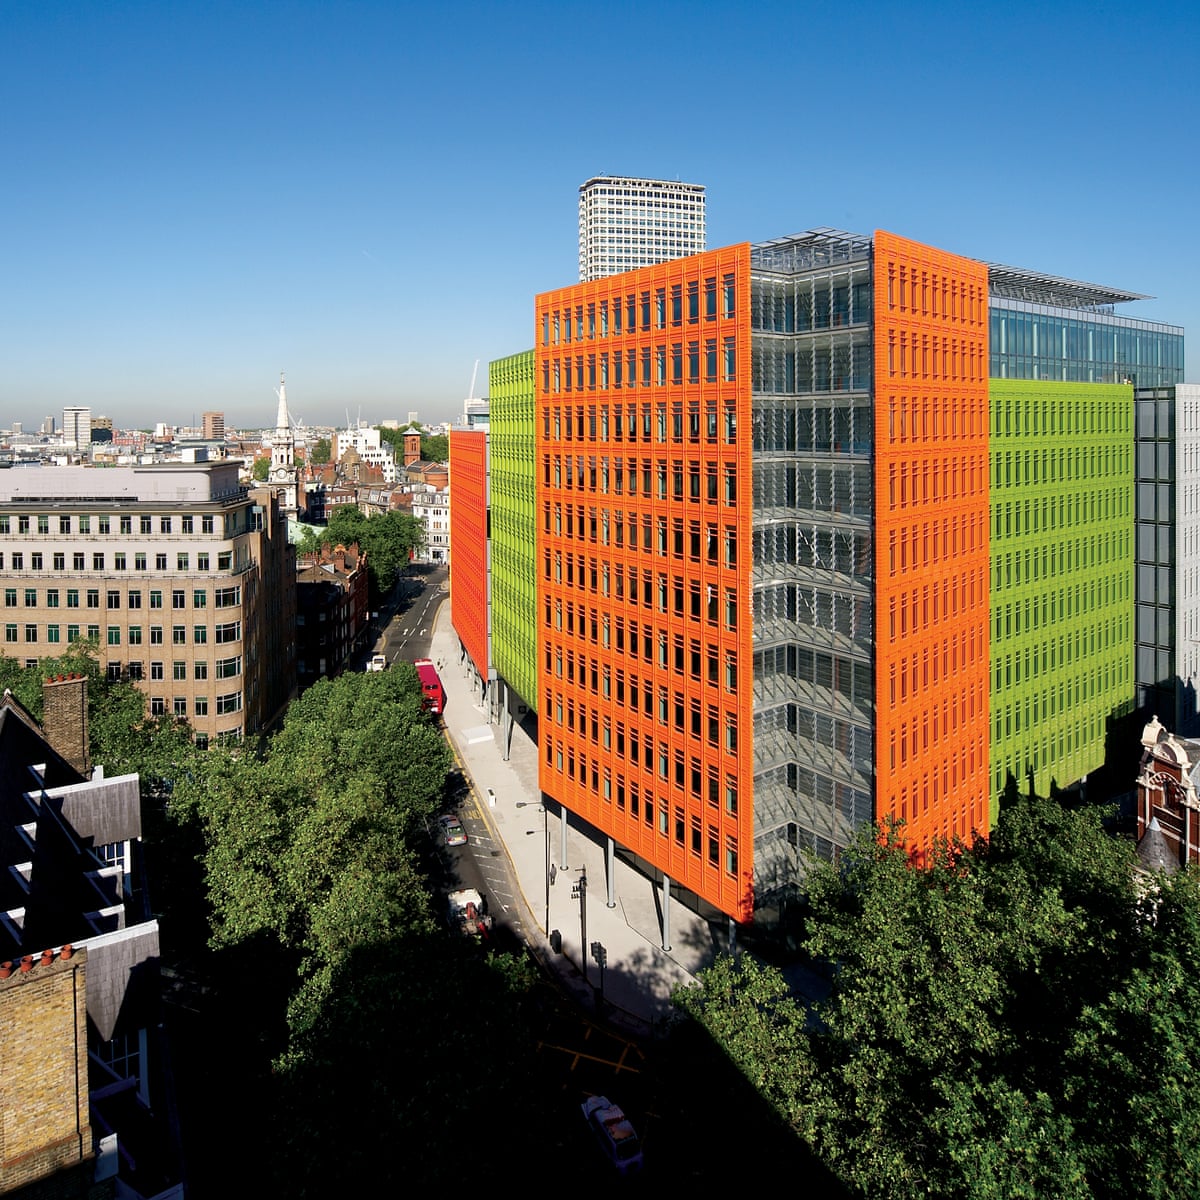 Google acquires Renzo Piano's Central Saint Giles building in London as its new headquarters.